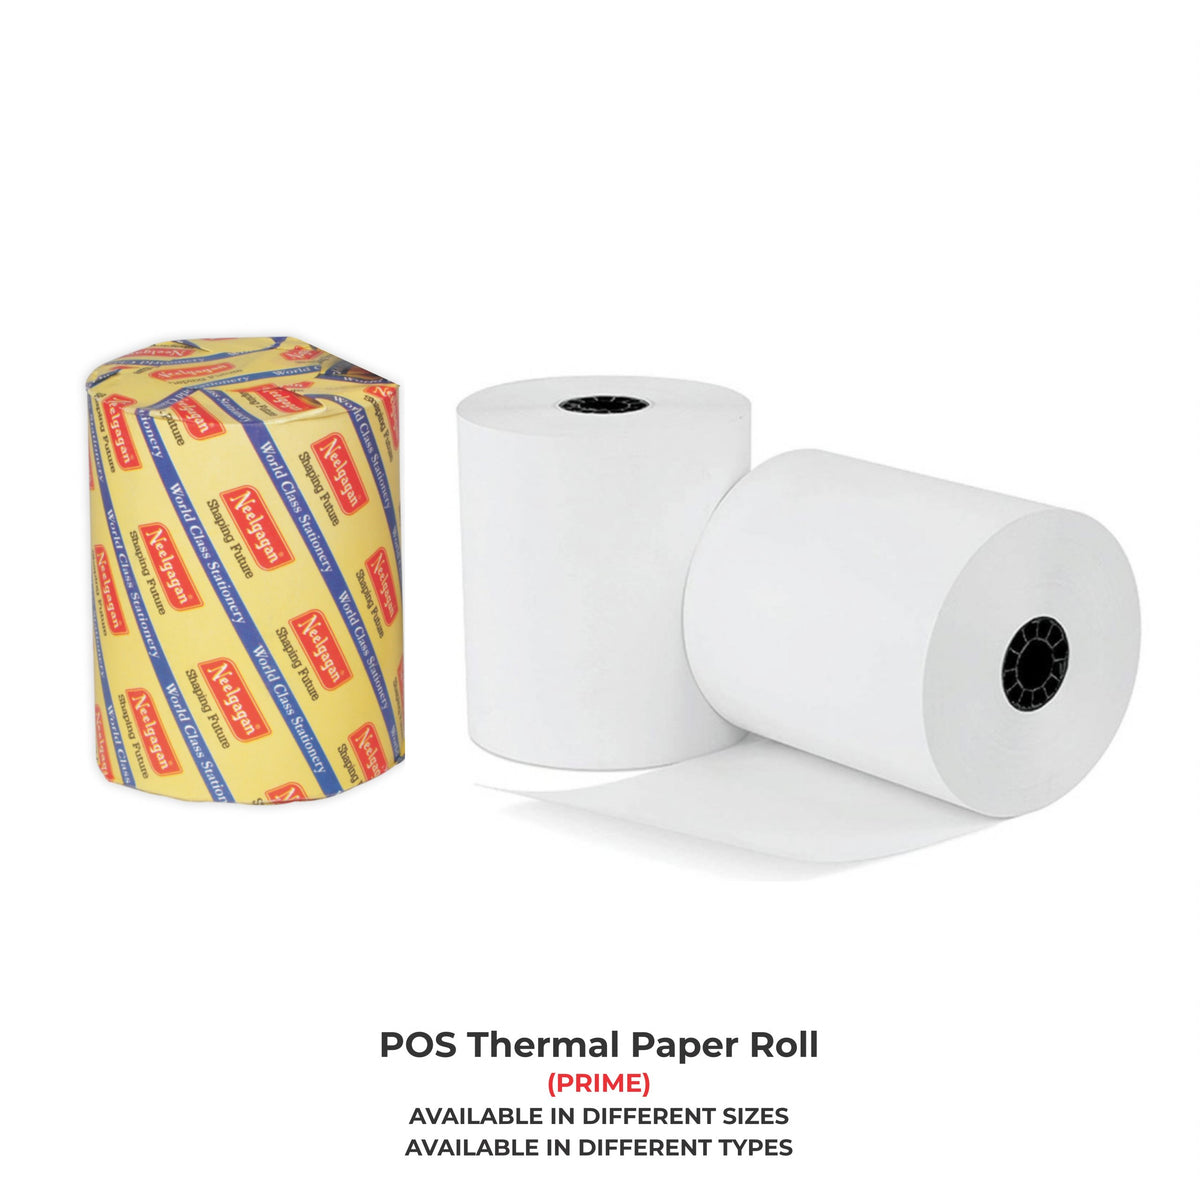 POS Thermal Paper Roll (Prime)